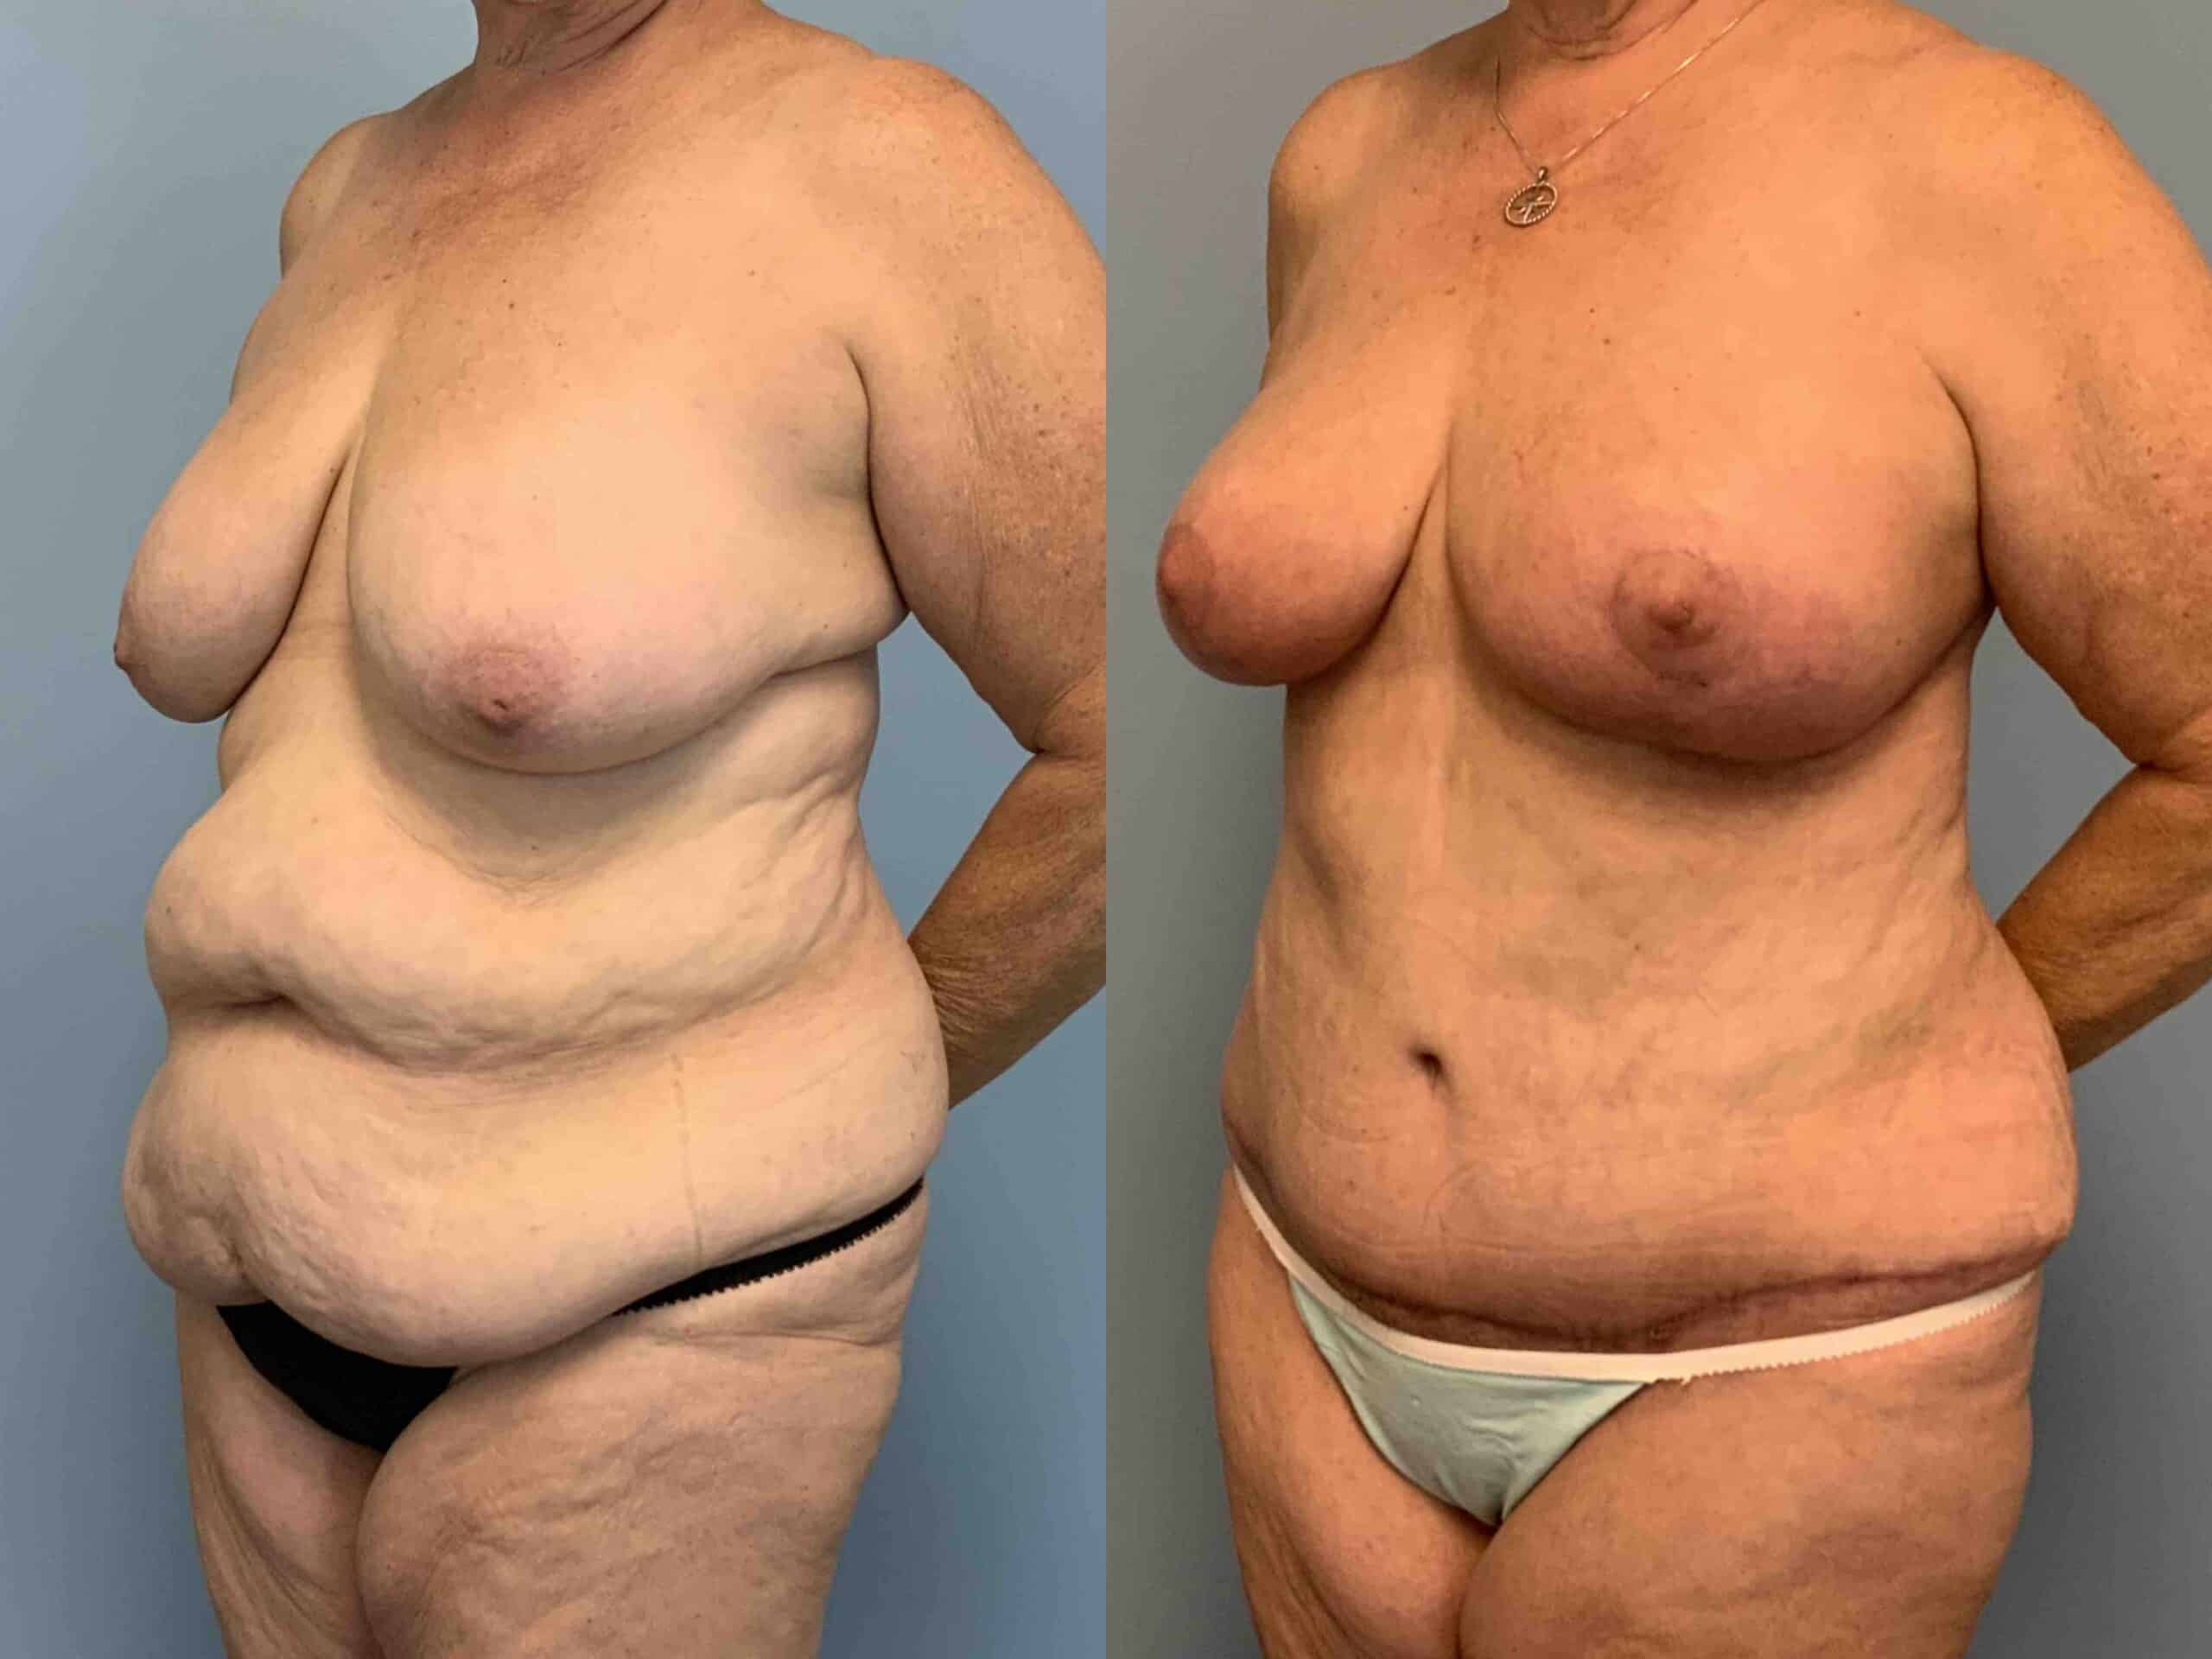 Before and after, patient 2 mo post op from Breast Reduction, Tummy Tuck, VASER Abdomen, Renuvion Abdomen, Axilla & Mons, Axillary Roll Resection procedures performed by Dr. Paul Vanek